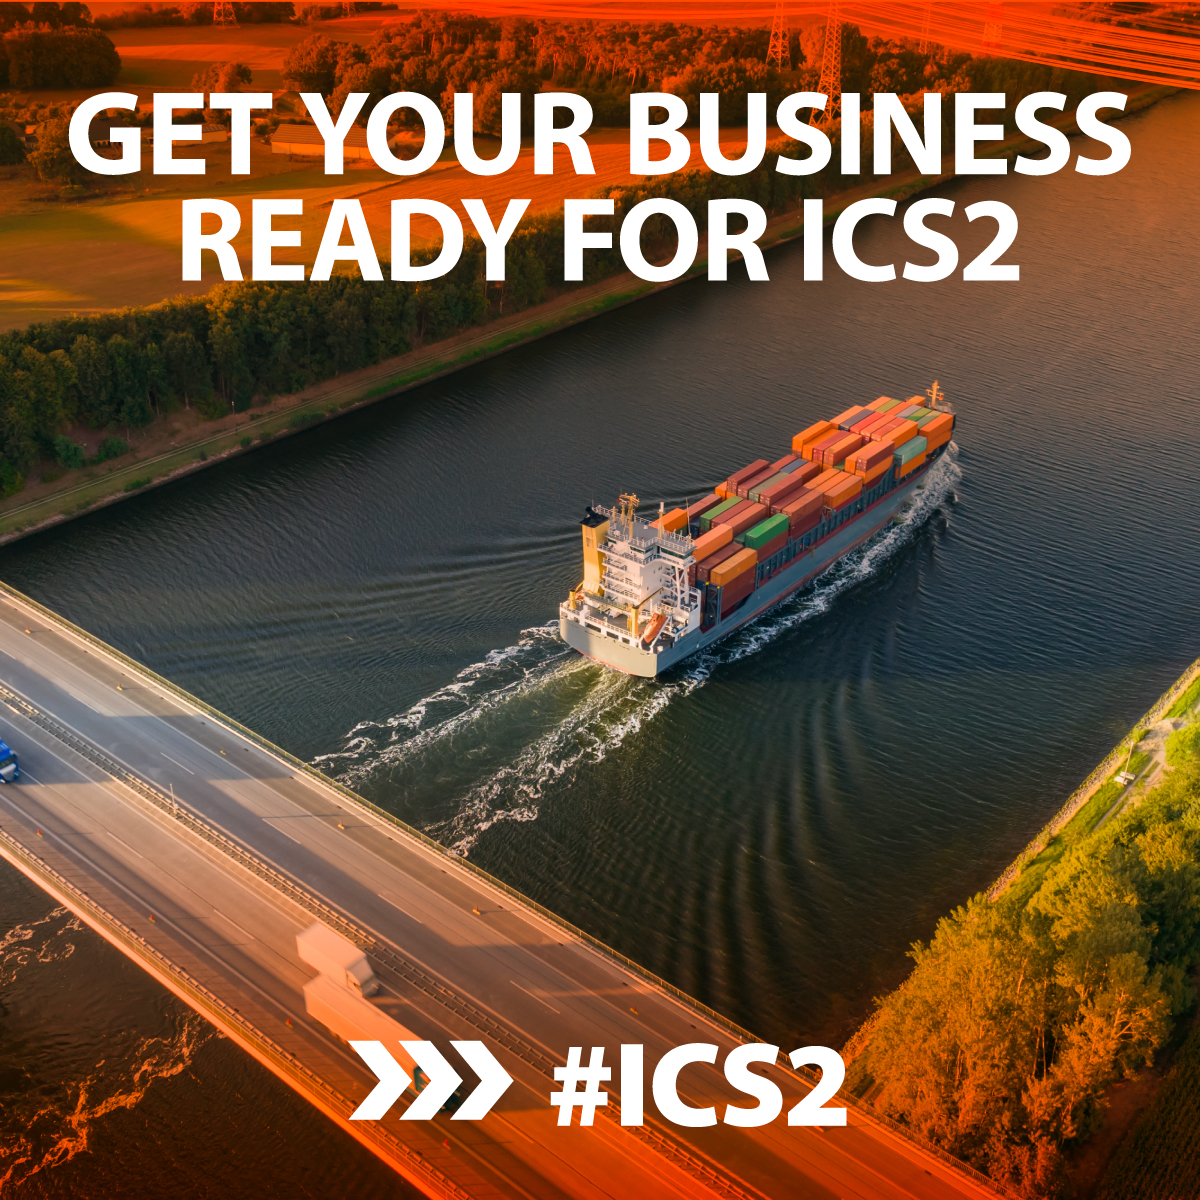 📢Maritime & inland waterway carriers, deadline alert! 🚢 Ensure your systems are ready for #ICS2 by 3 June. ⚙️ Update your IT systems, adjust business processes, complete self-conformance tests. ⌛️ To prepare for smooth ENS filings on time, visit 👉europa.eu/!XDV8qM